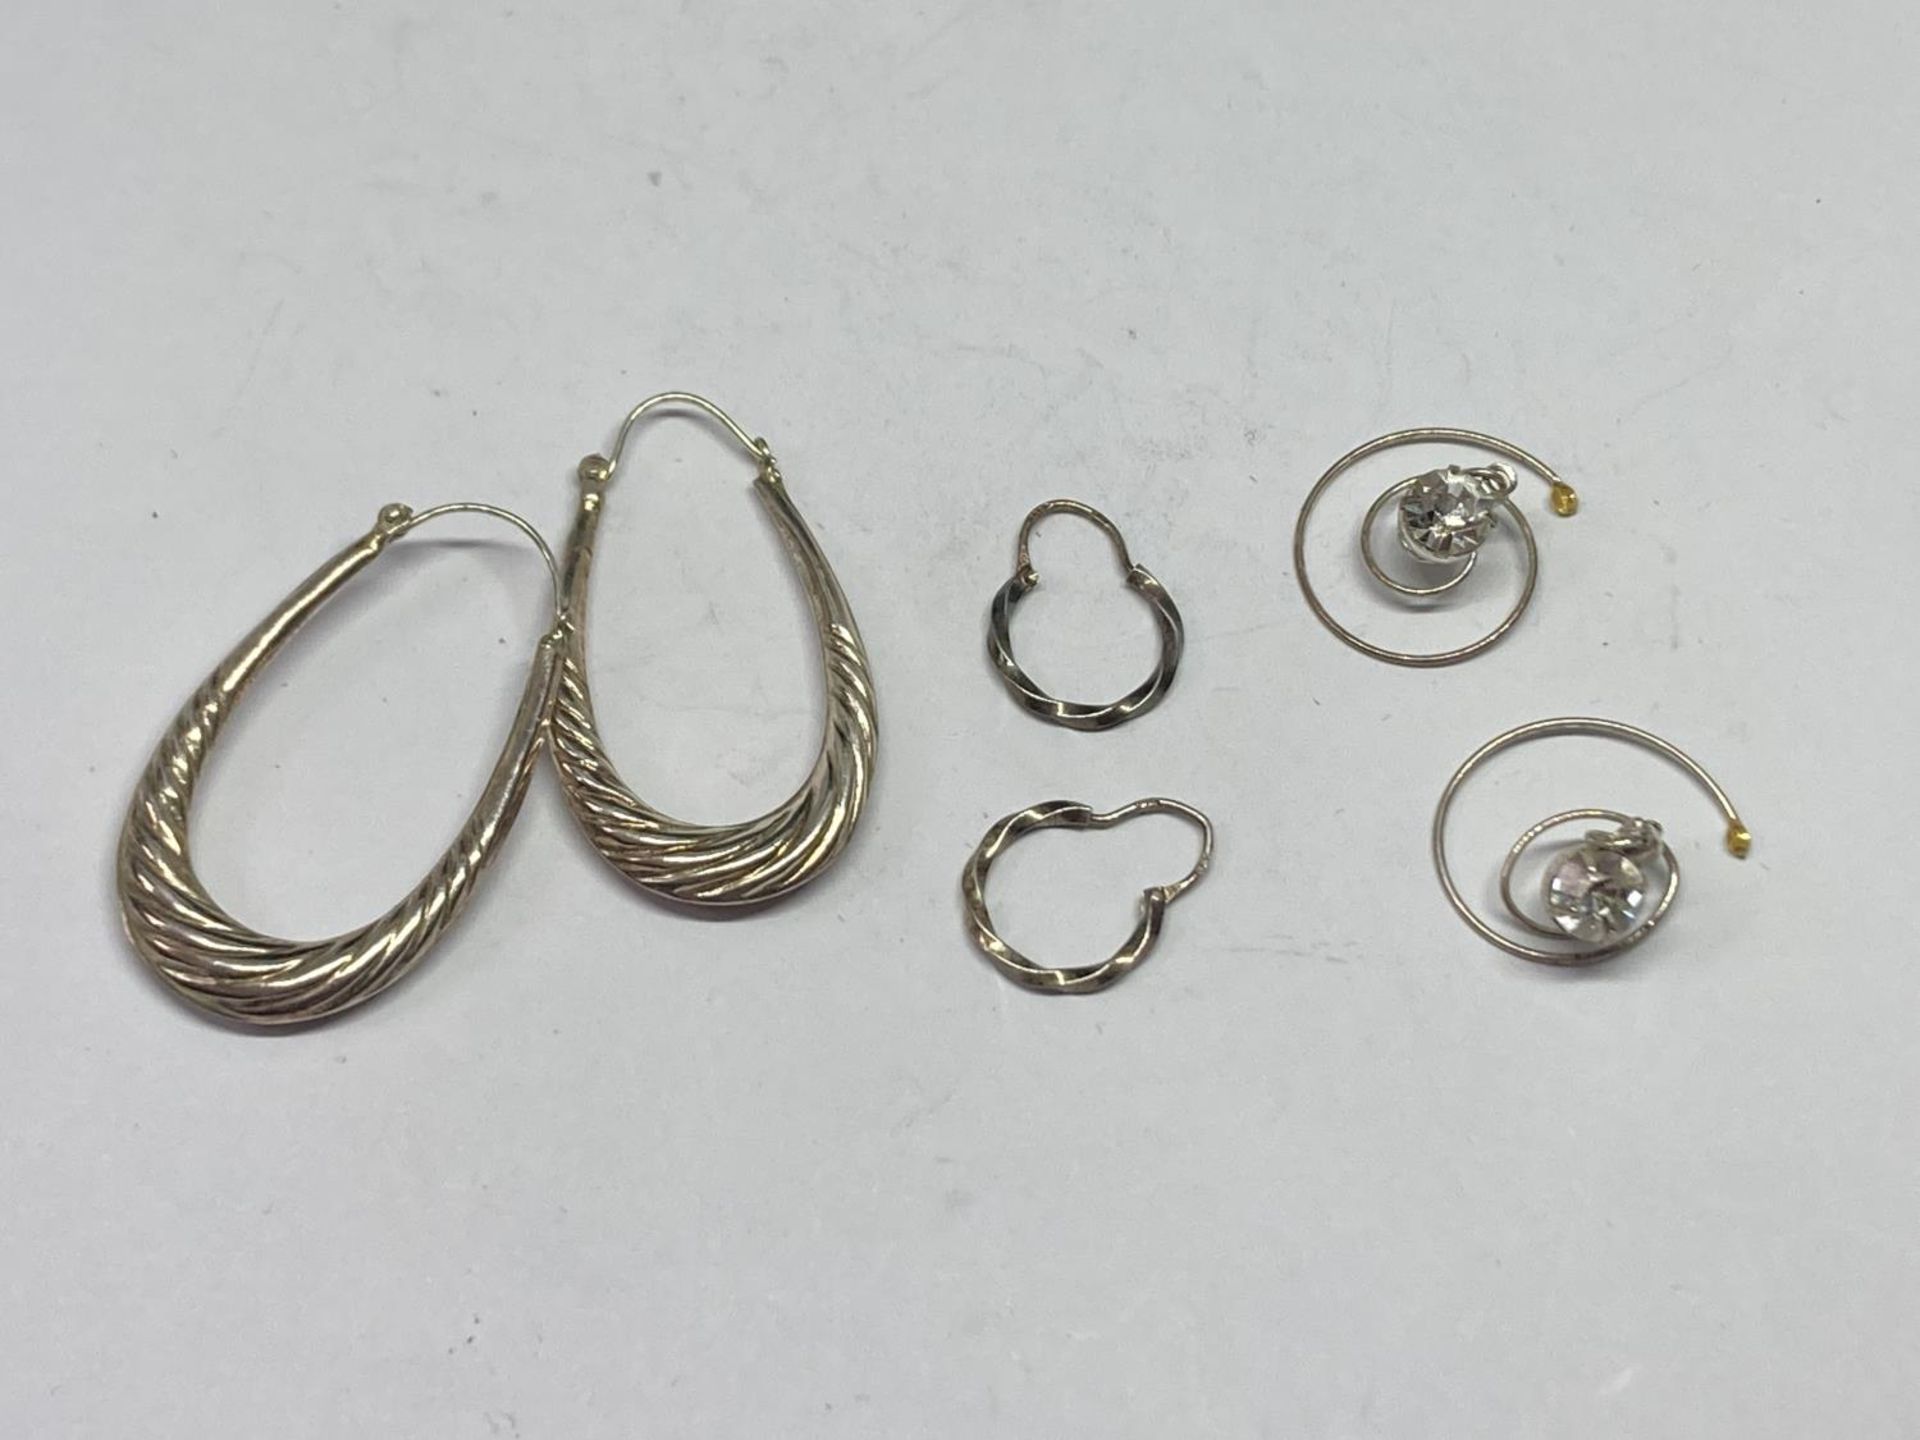 SEVEN PAIRS OF SILVER EARRINGS - Image 3 of 3